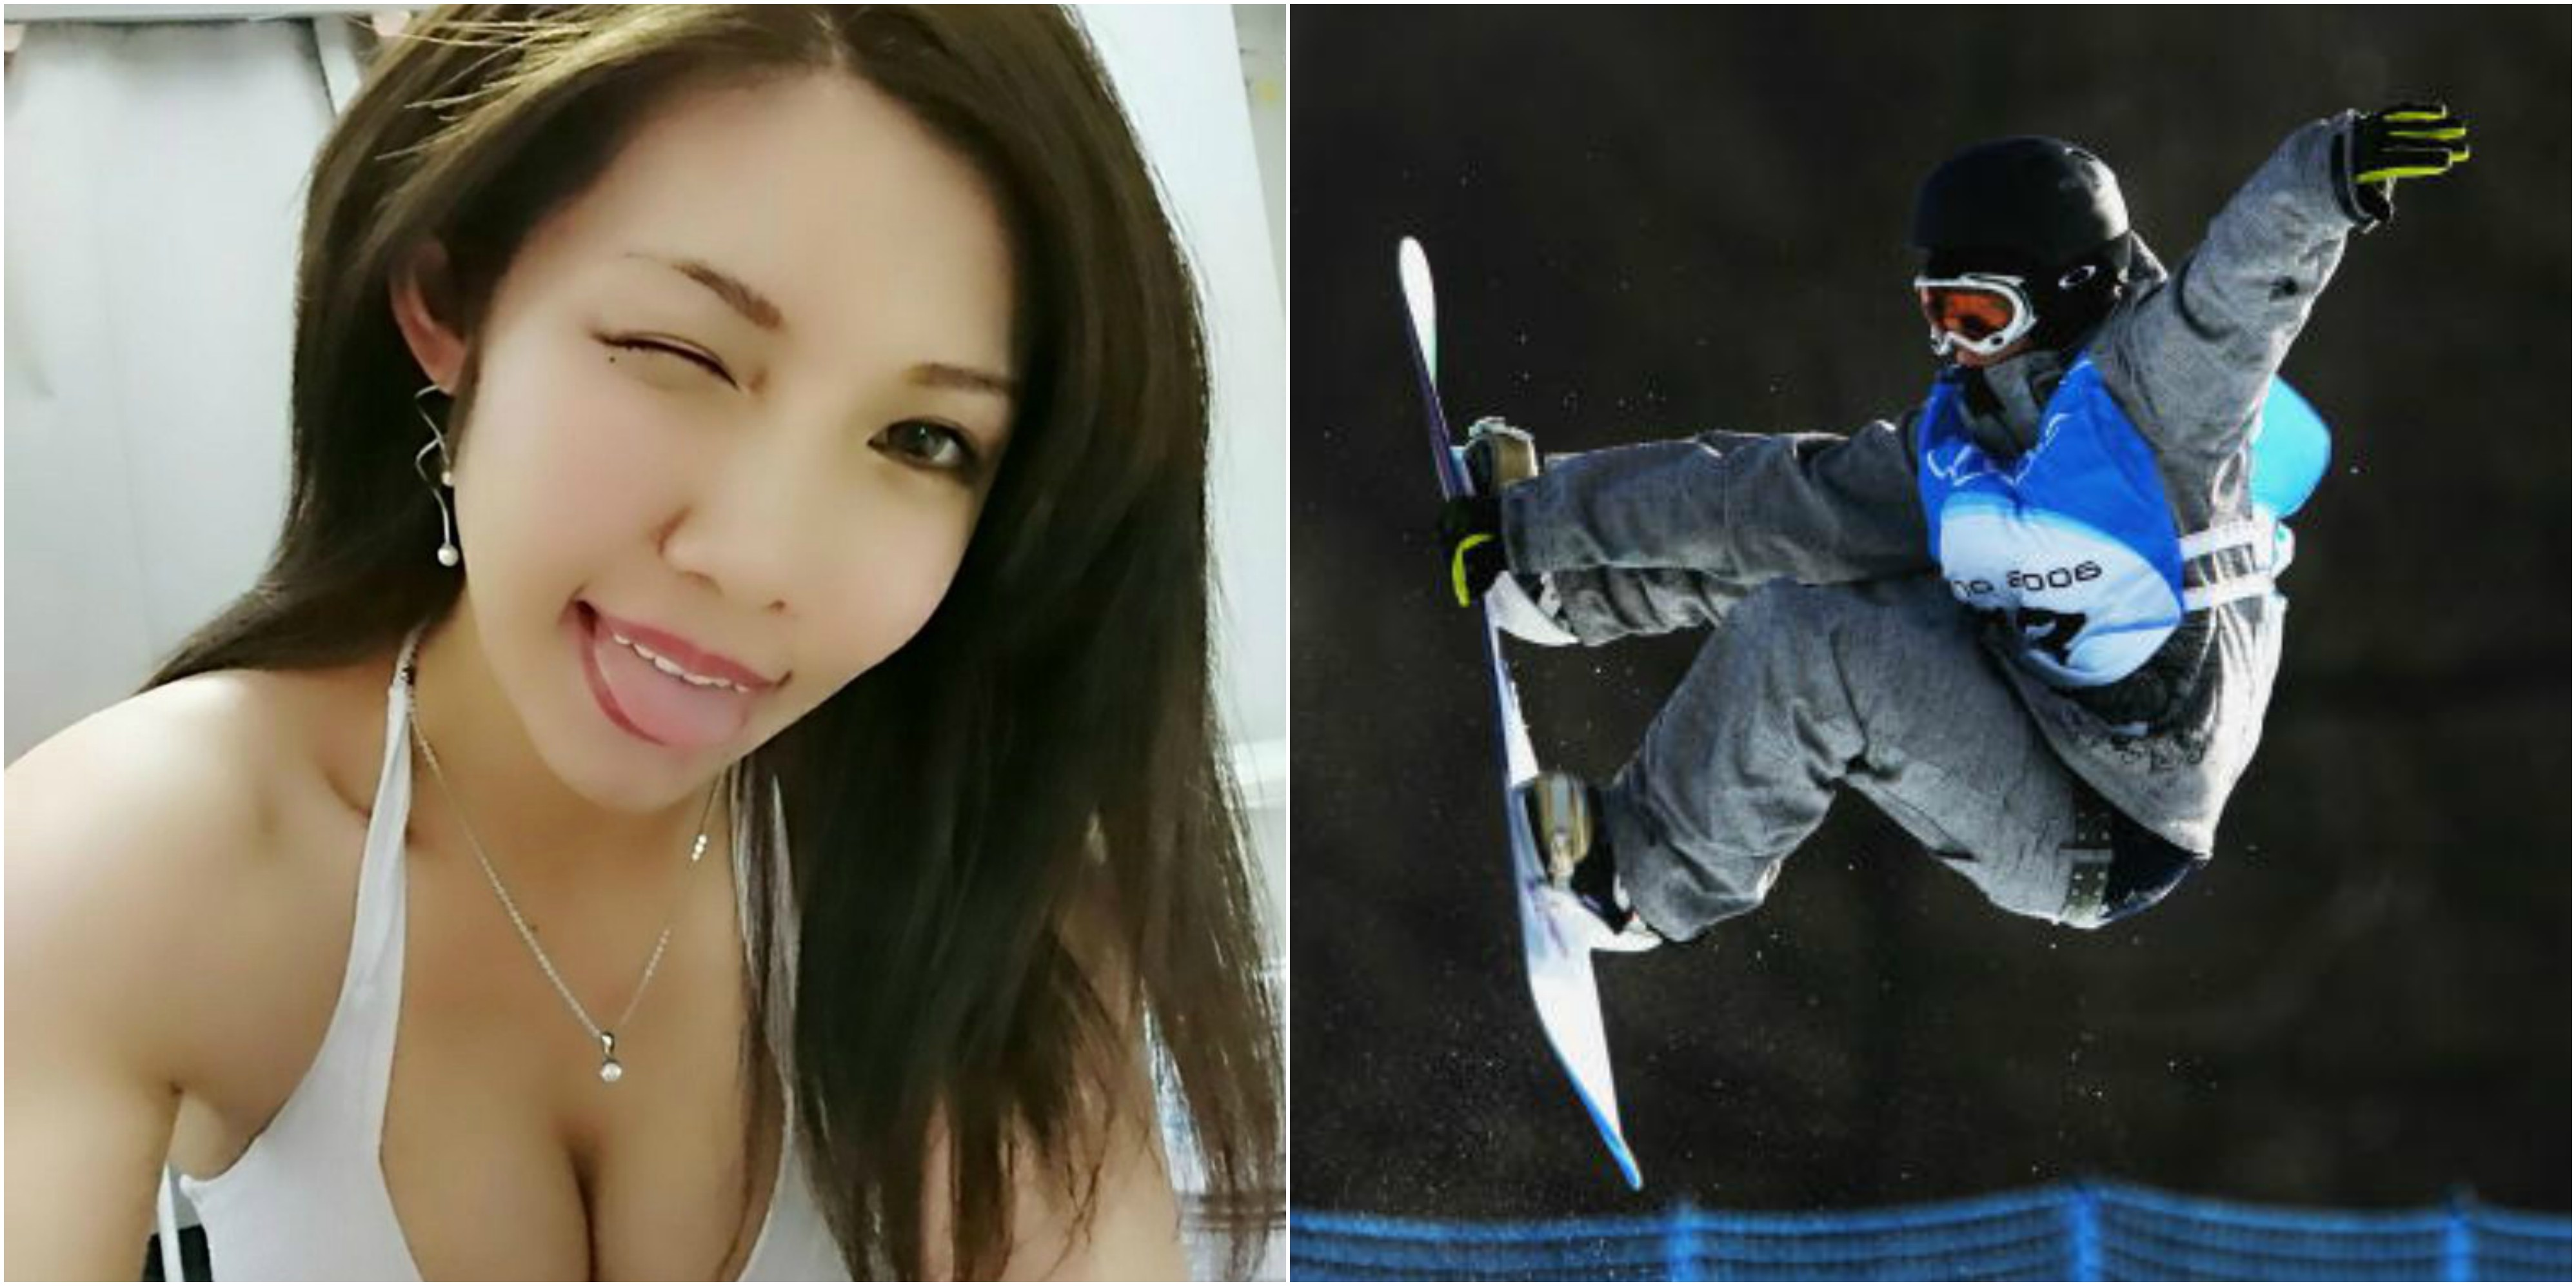 Total Pro Sports Snowboarder Gives Up Porn Career For Another Shot At